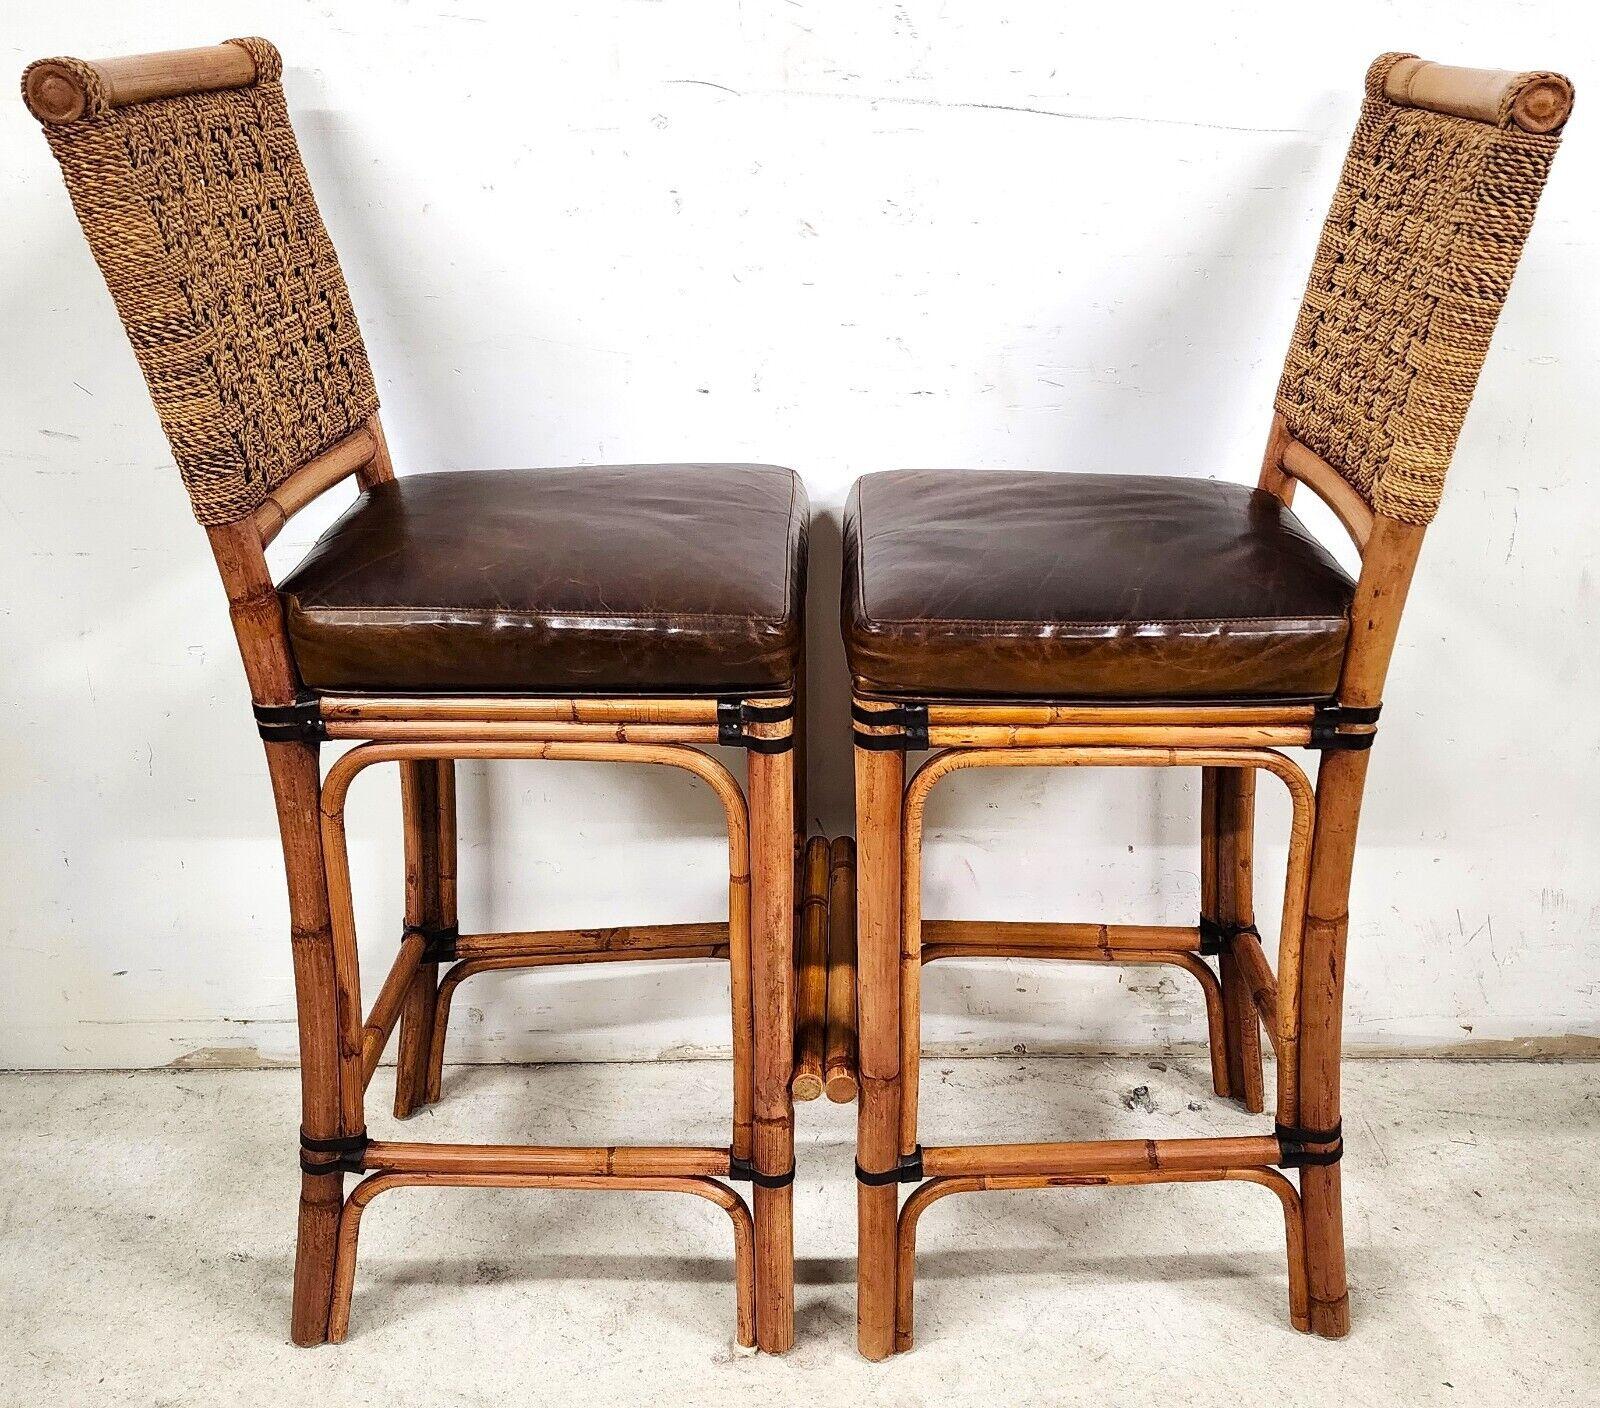 2 Bamboo Leather Barstools with Rattan & Braided Rope by Palecek 1